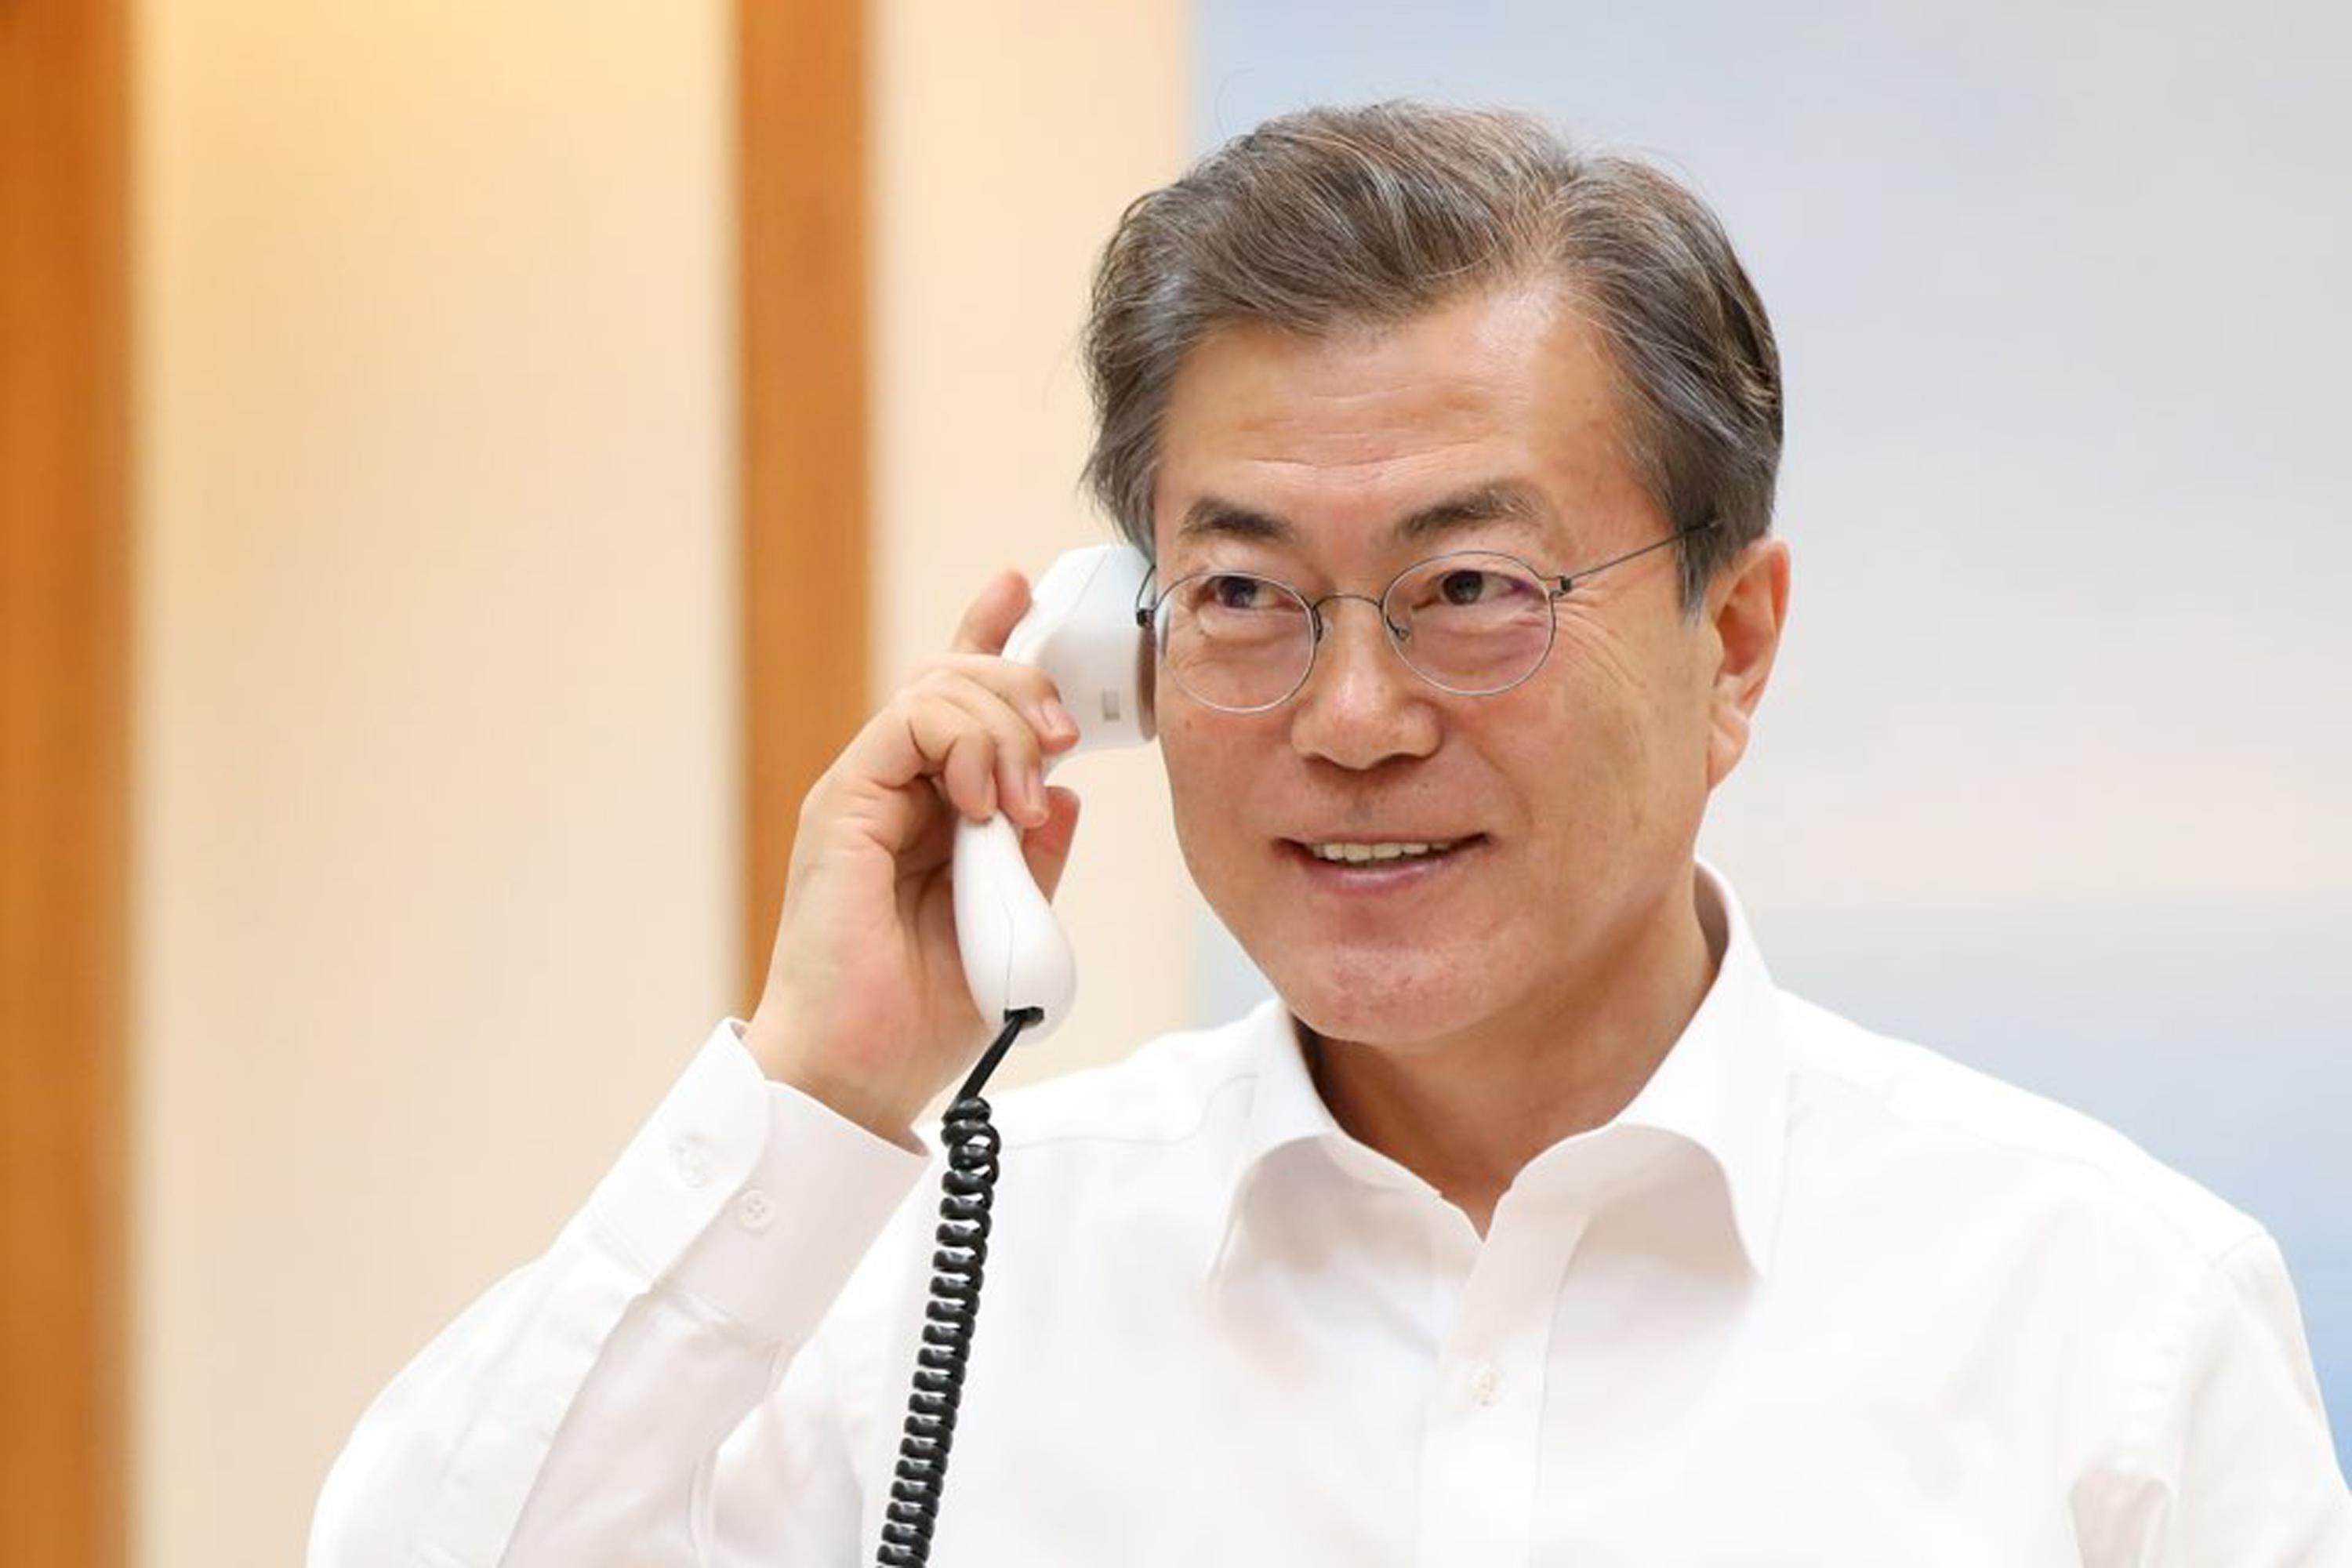 SEOUL, SOUTH KOREA - JANUARY 04:  In this handout image provided by the South Korean Presidential Blue House, South Korean President Moon Jae-in talks with U.S. President Donald Trump on January 4, 2018 in Seoul, South Korea. South Korean and U.S. agreed to delay joint military drills during the PyeongChang Winter Olympic Games.  (Photo by South Korean Presidential Blue House via Getty Images)